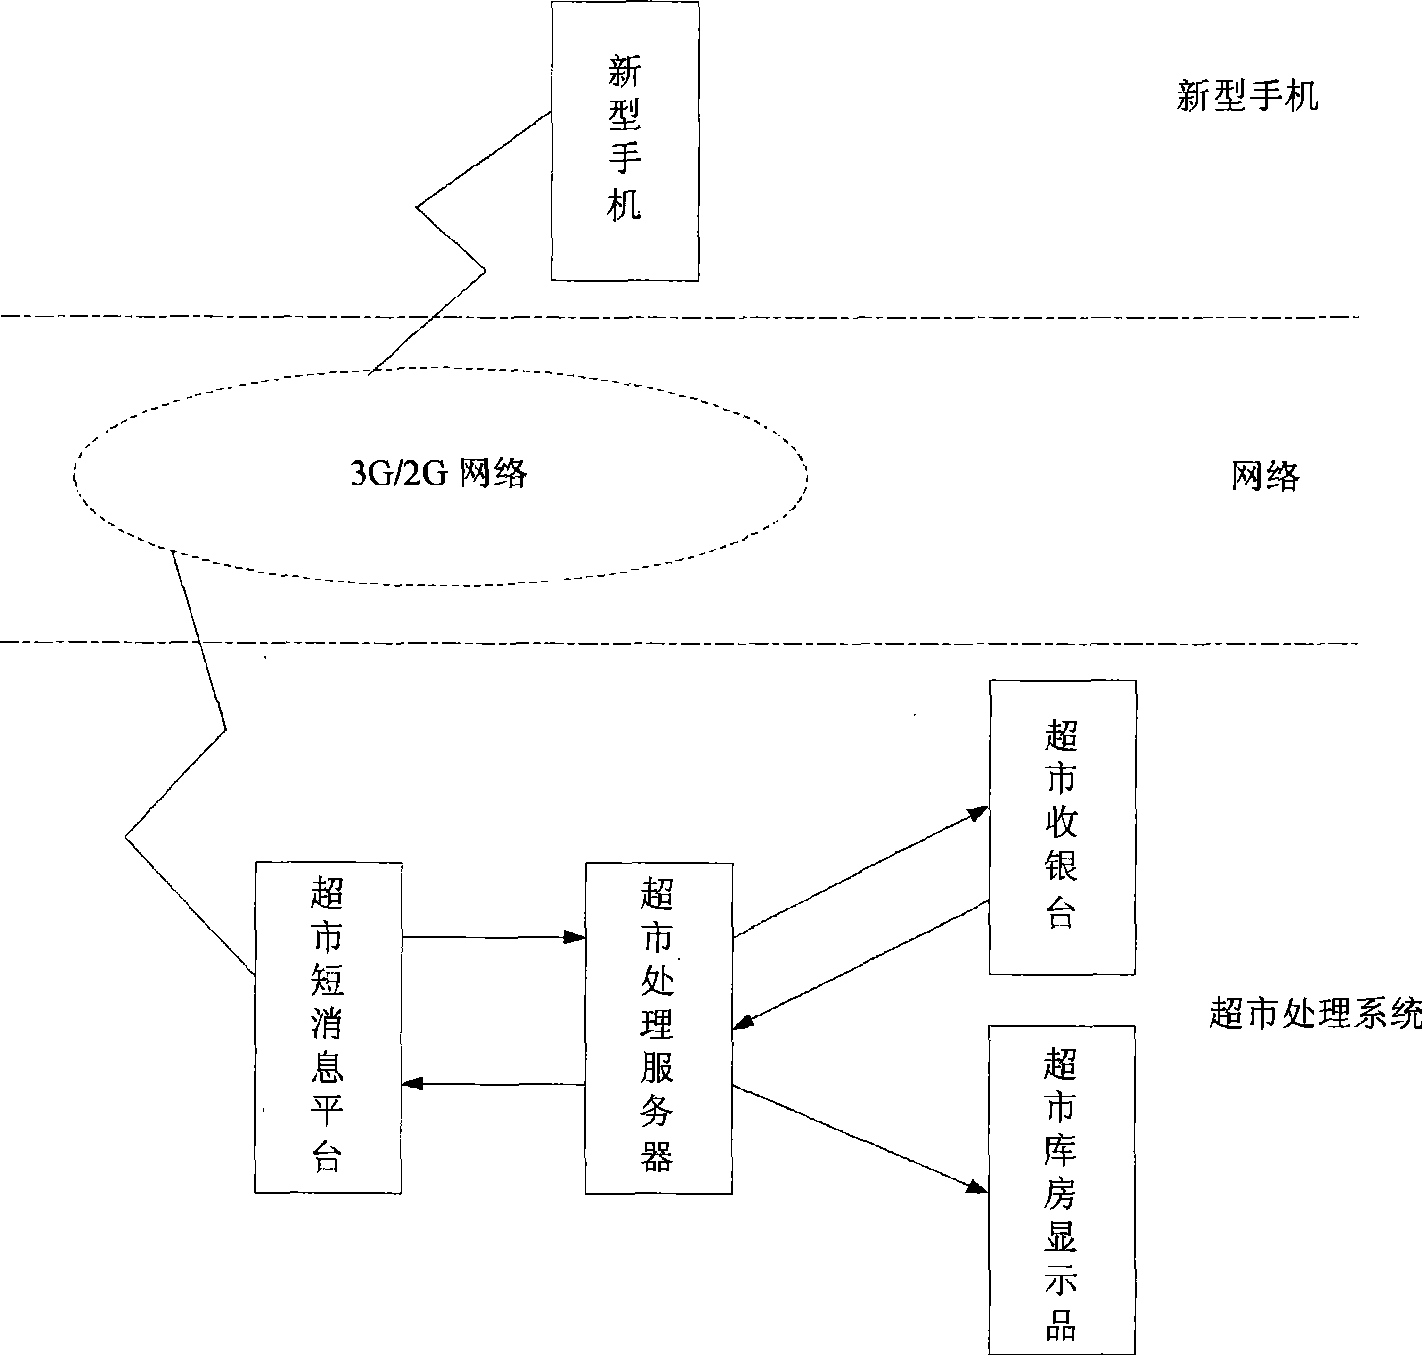 Method for shopping by using terminals, supermarket processing system and terminal